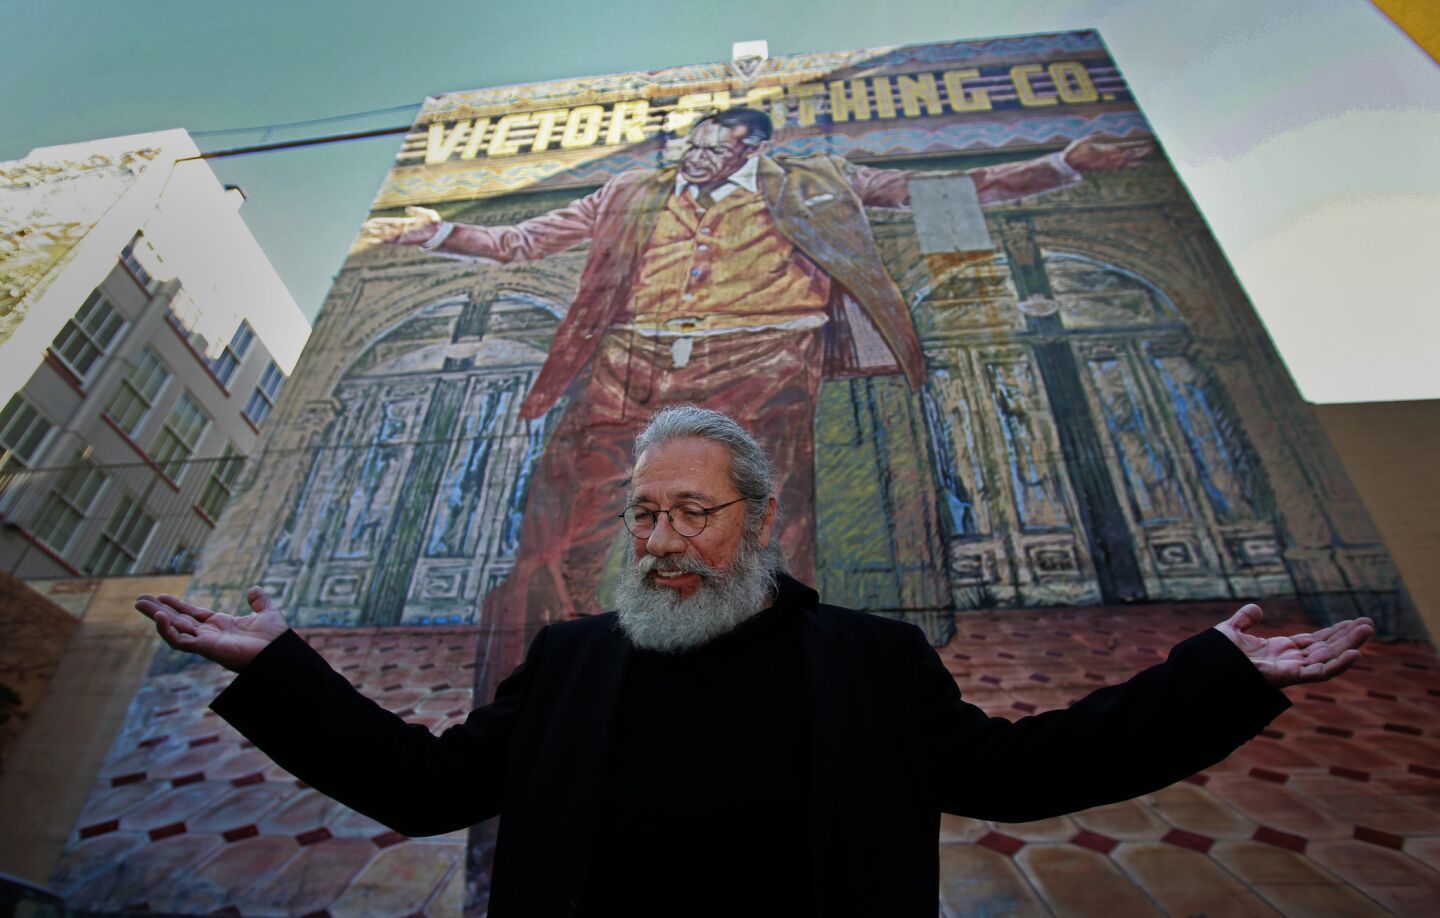 Actor Edward James Olmos celebrates the beginning of restoration efforts in 2014 for the 70-foot-tall "Pope of Broadway" mural featuring Anthony Quinn with his arms outstretched over downtown Los Angeles.